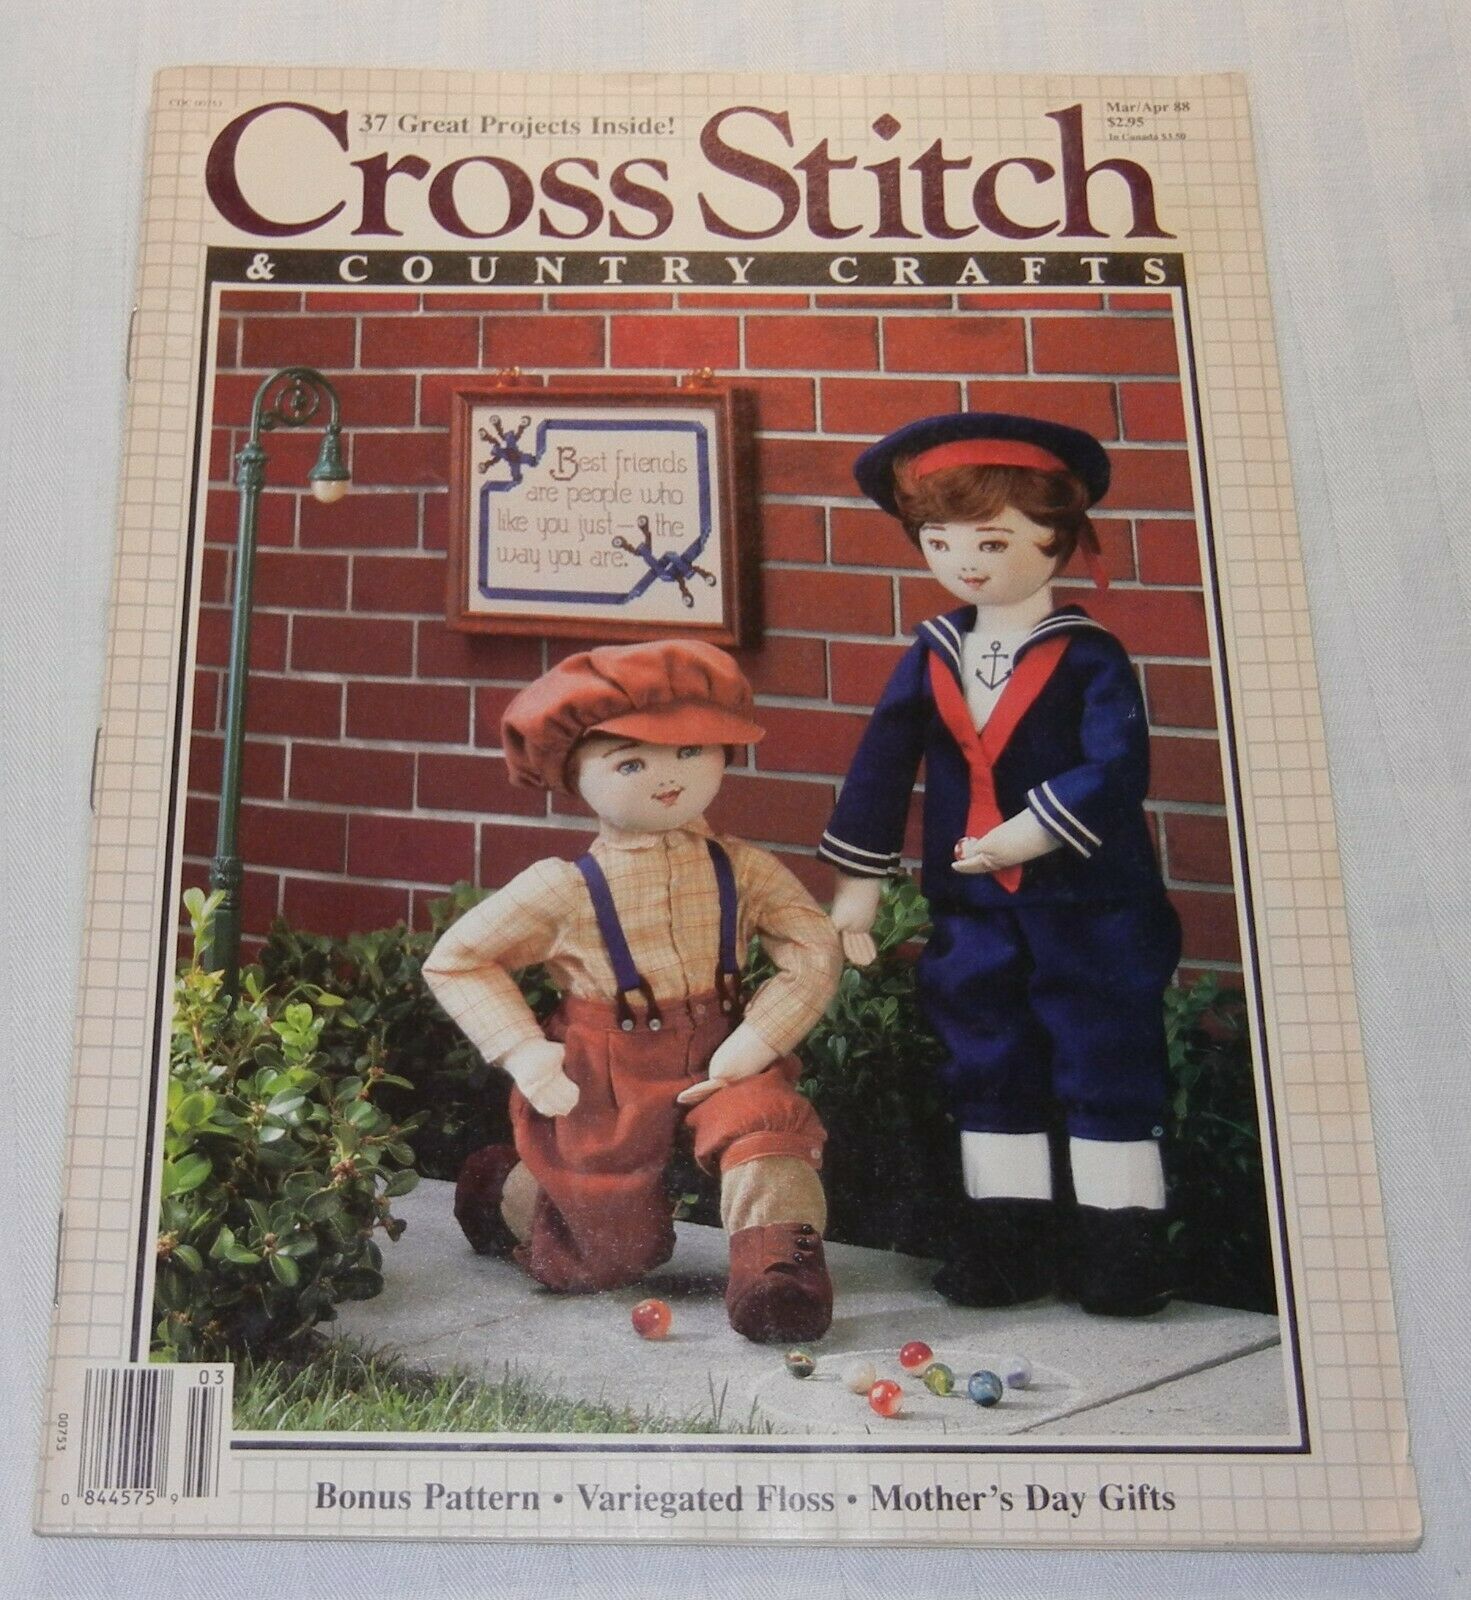 1988 Cross Stitch & Country Crafts Magazine March/april - Issue Has 37 Projects